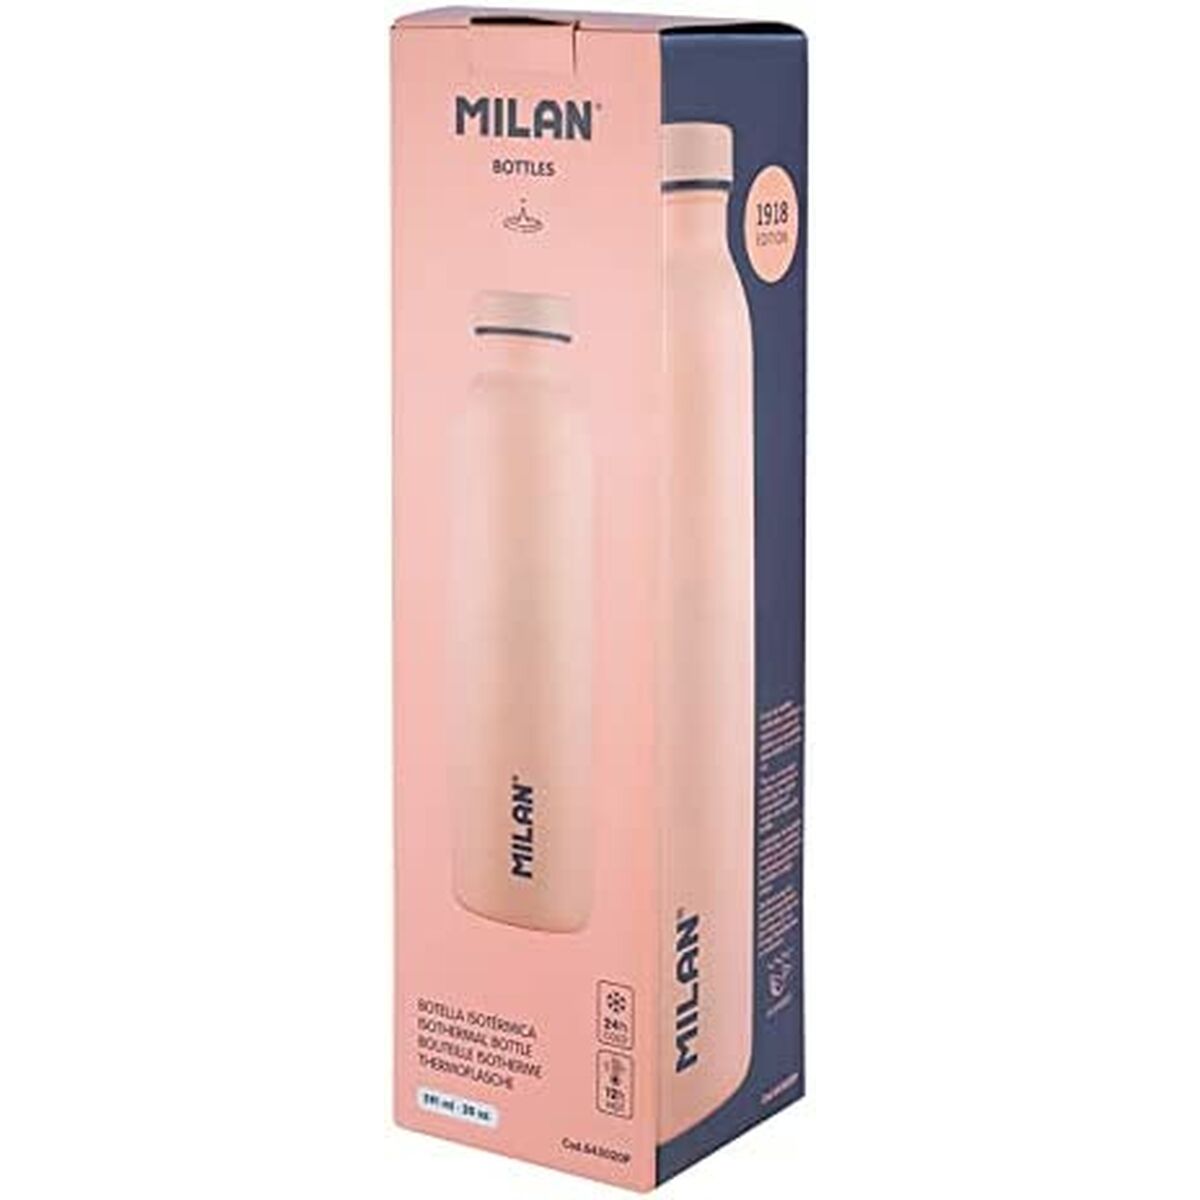 Thermosfles Milan 1918 Roze Roestvrij staal 591 ml